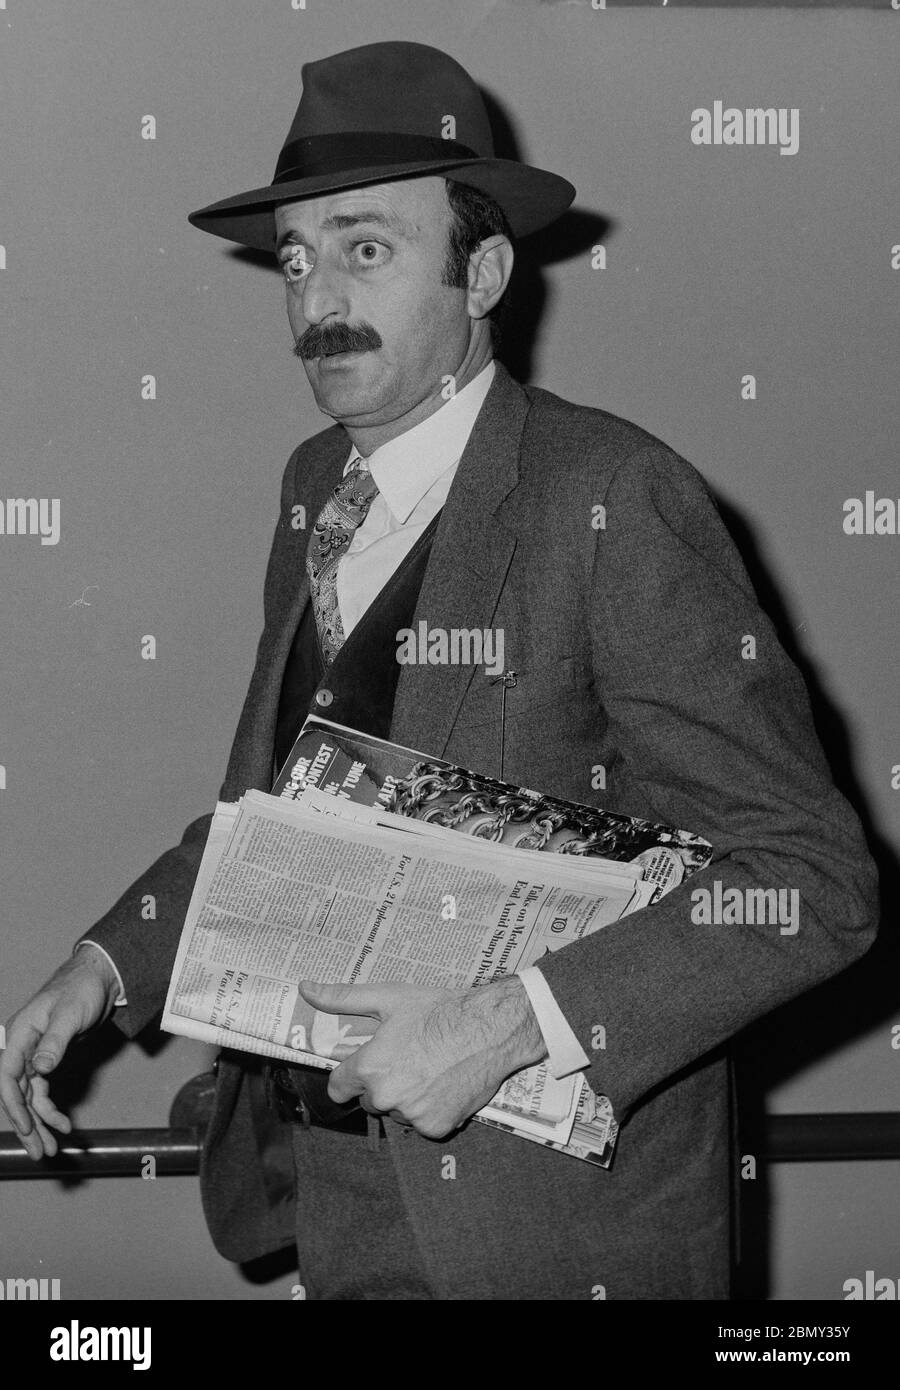 Lebanese politician Walid Jumblatt leader of Lebanon's Druze party arriving  at London's Heathrow Airport in March 1987 Stock Photo - Alamy